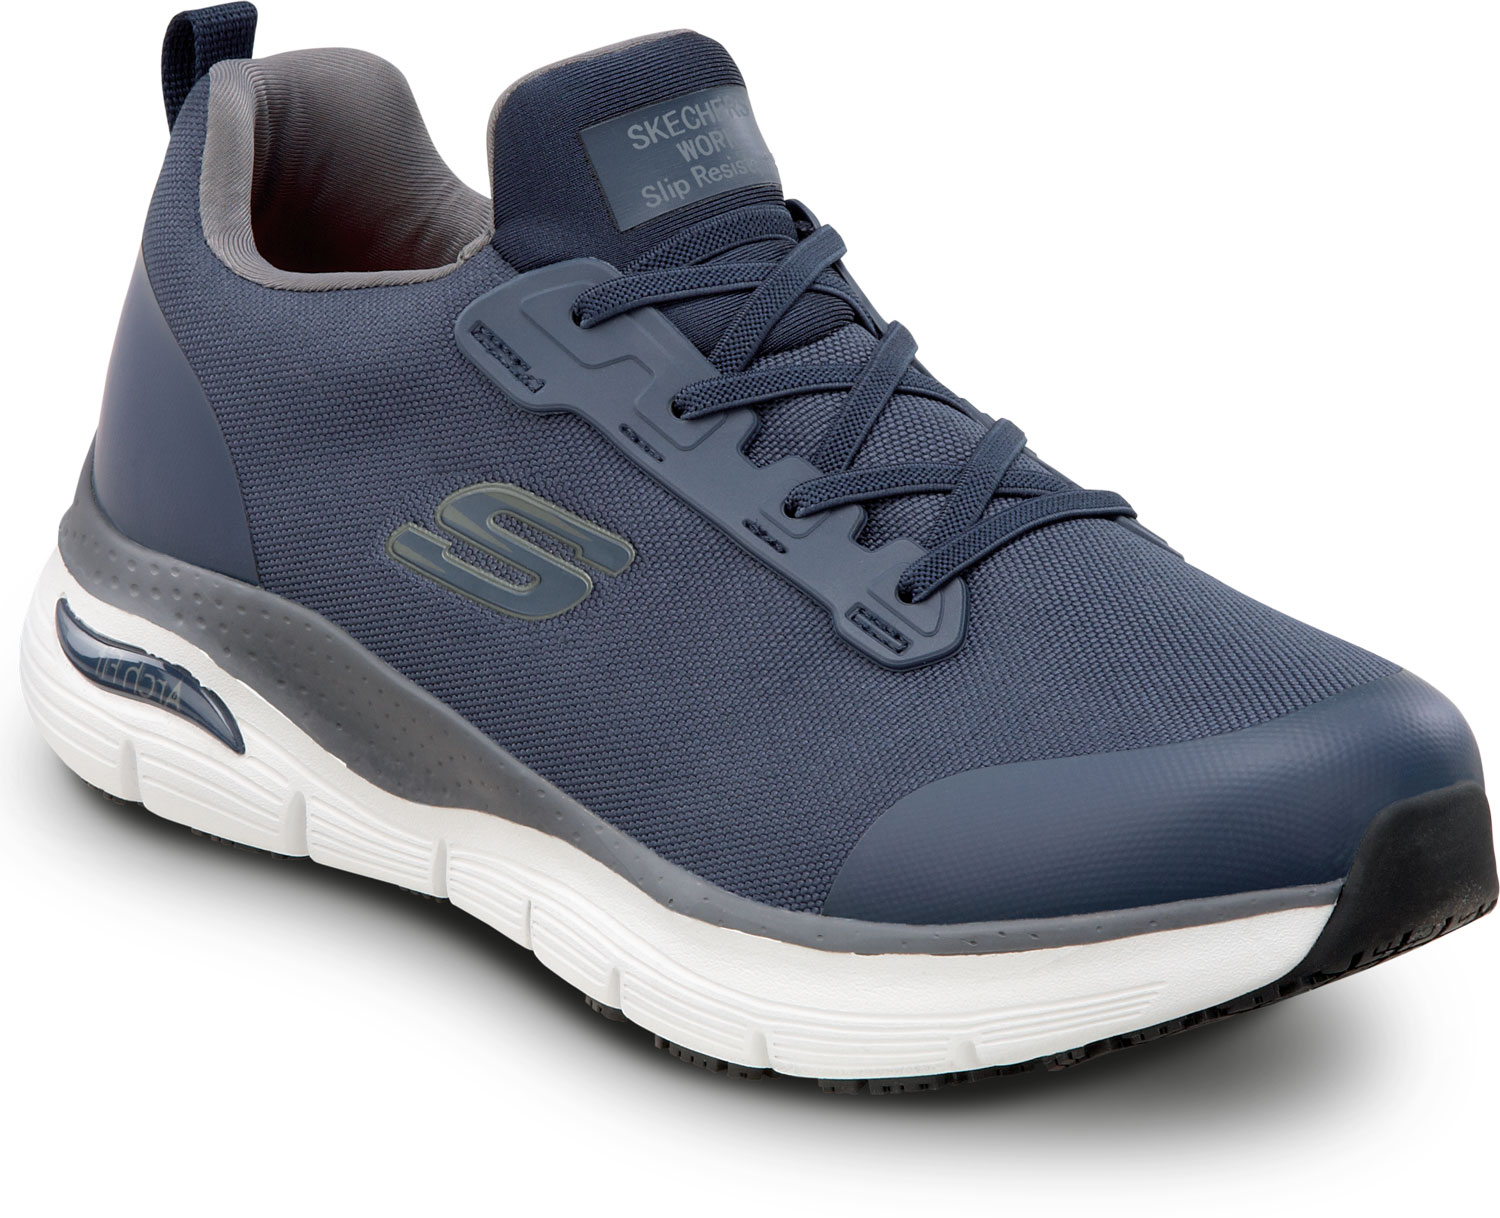 Zapatos Skechers Impermeables | lupon.gov.ph